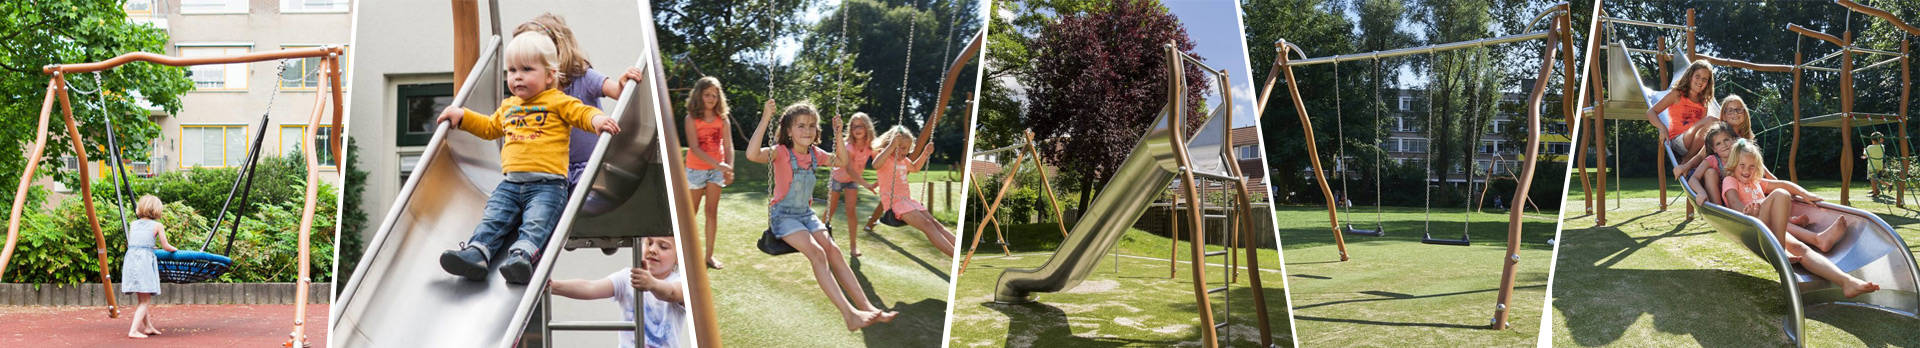 Slides & Swings - Play Equipment - Products